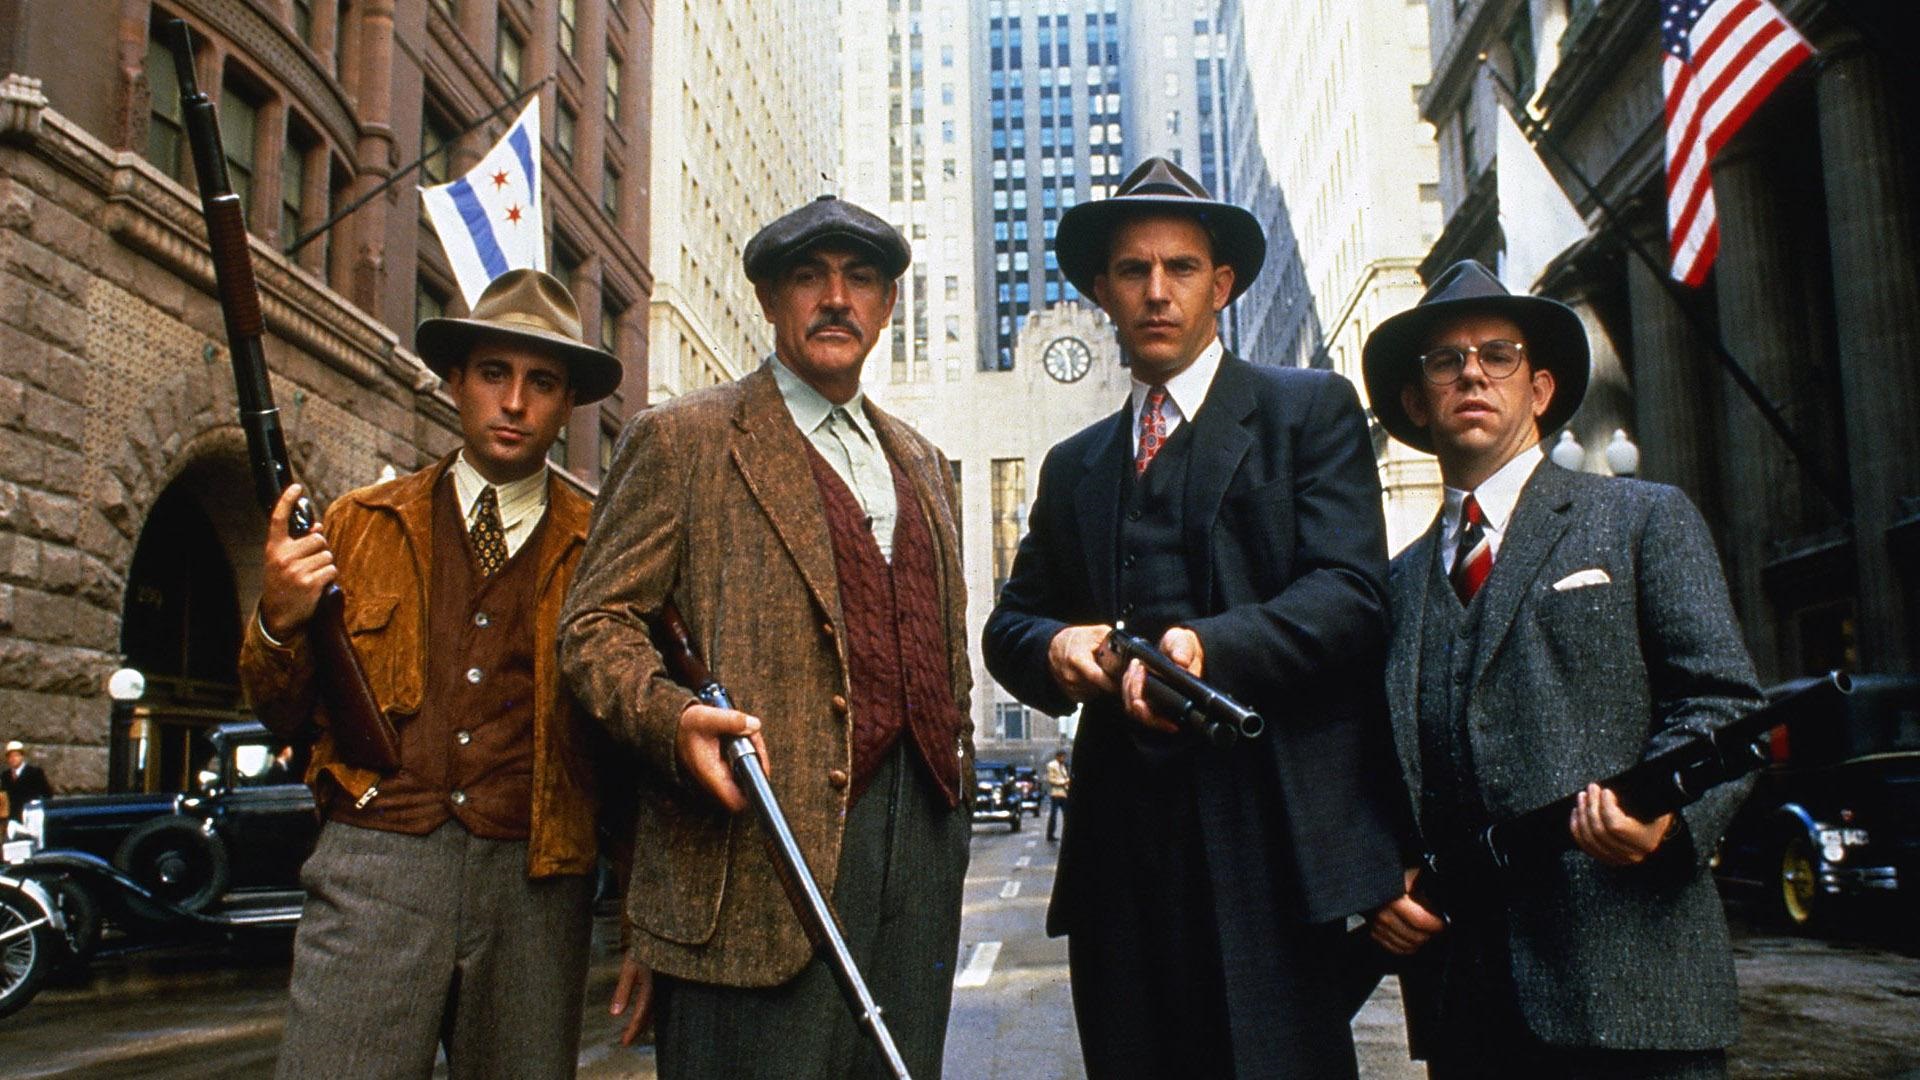 sean connery, movie, the untouchables, andy garcía, charles martin smith, kevin costner